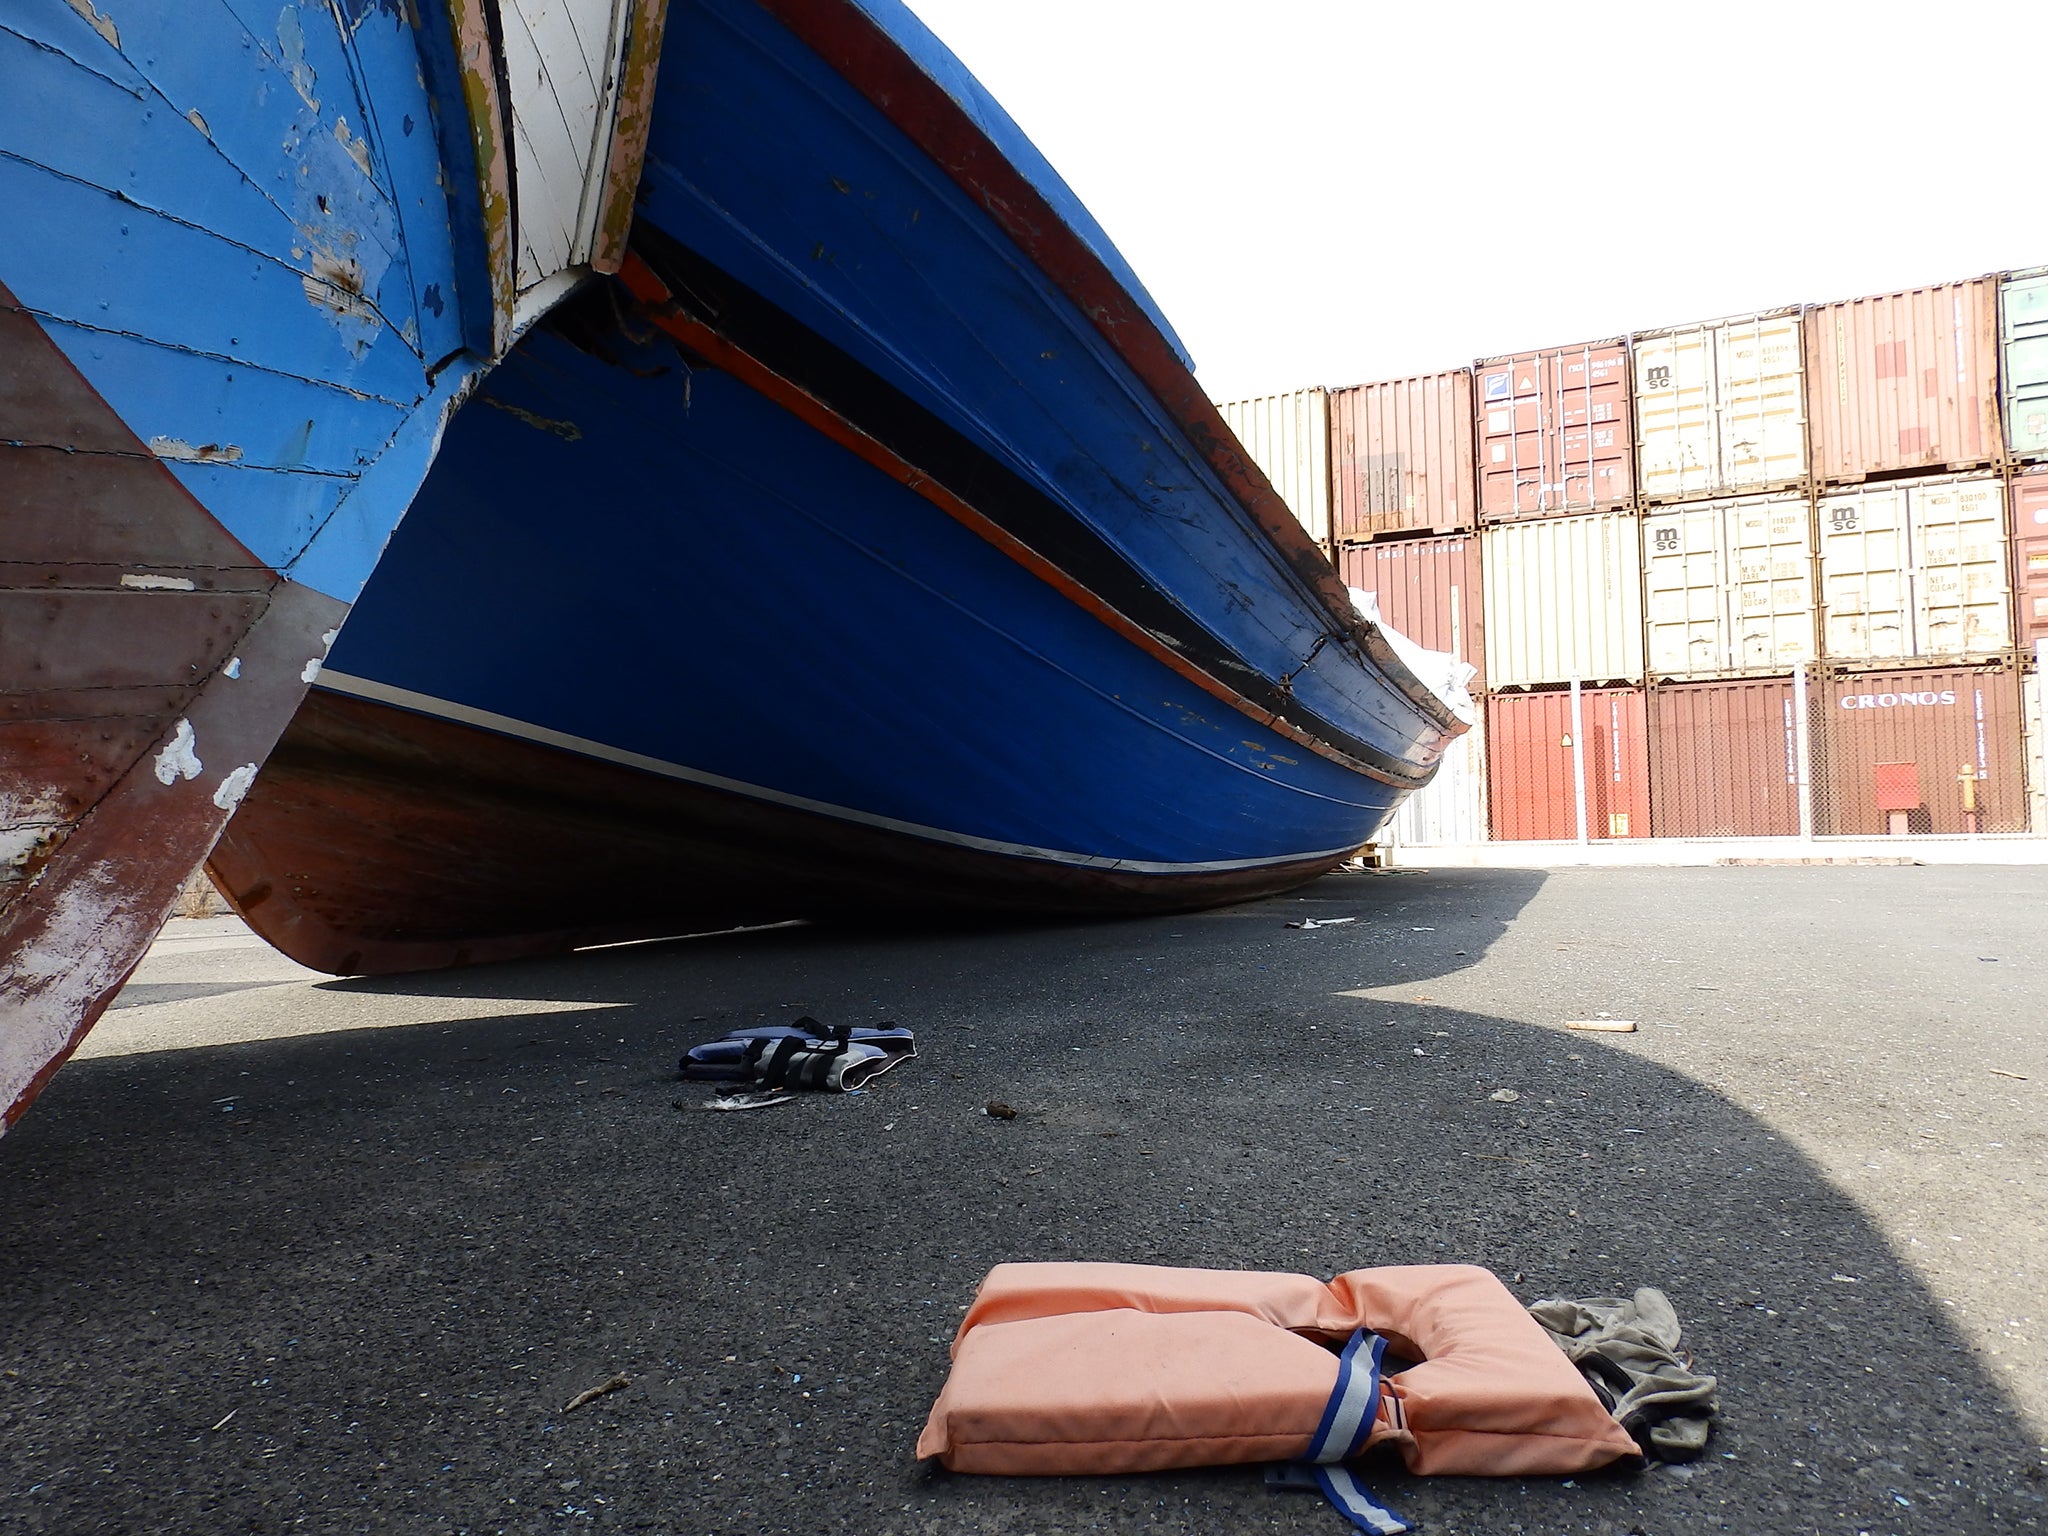 A vessel where almost 40 migrants out of the 600 packed on board were found dead below deck in June 2014